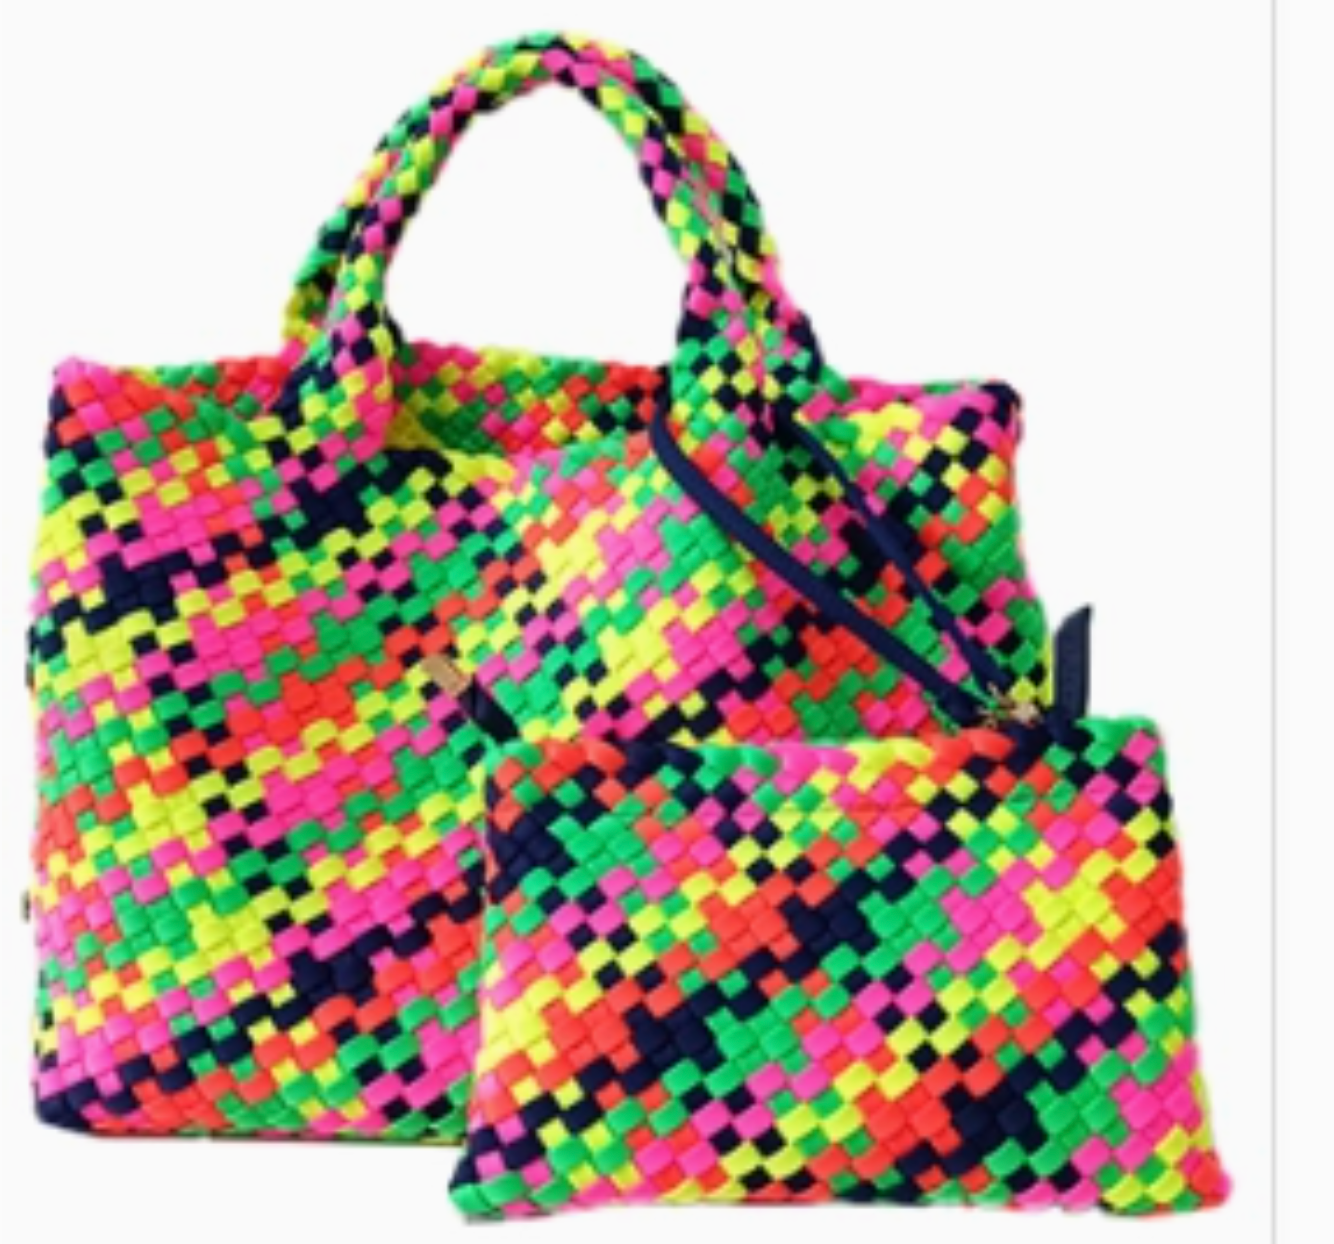 Large Neoprene Totes with pouch - various colors!